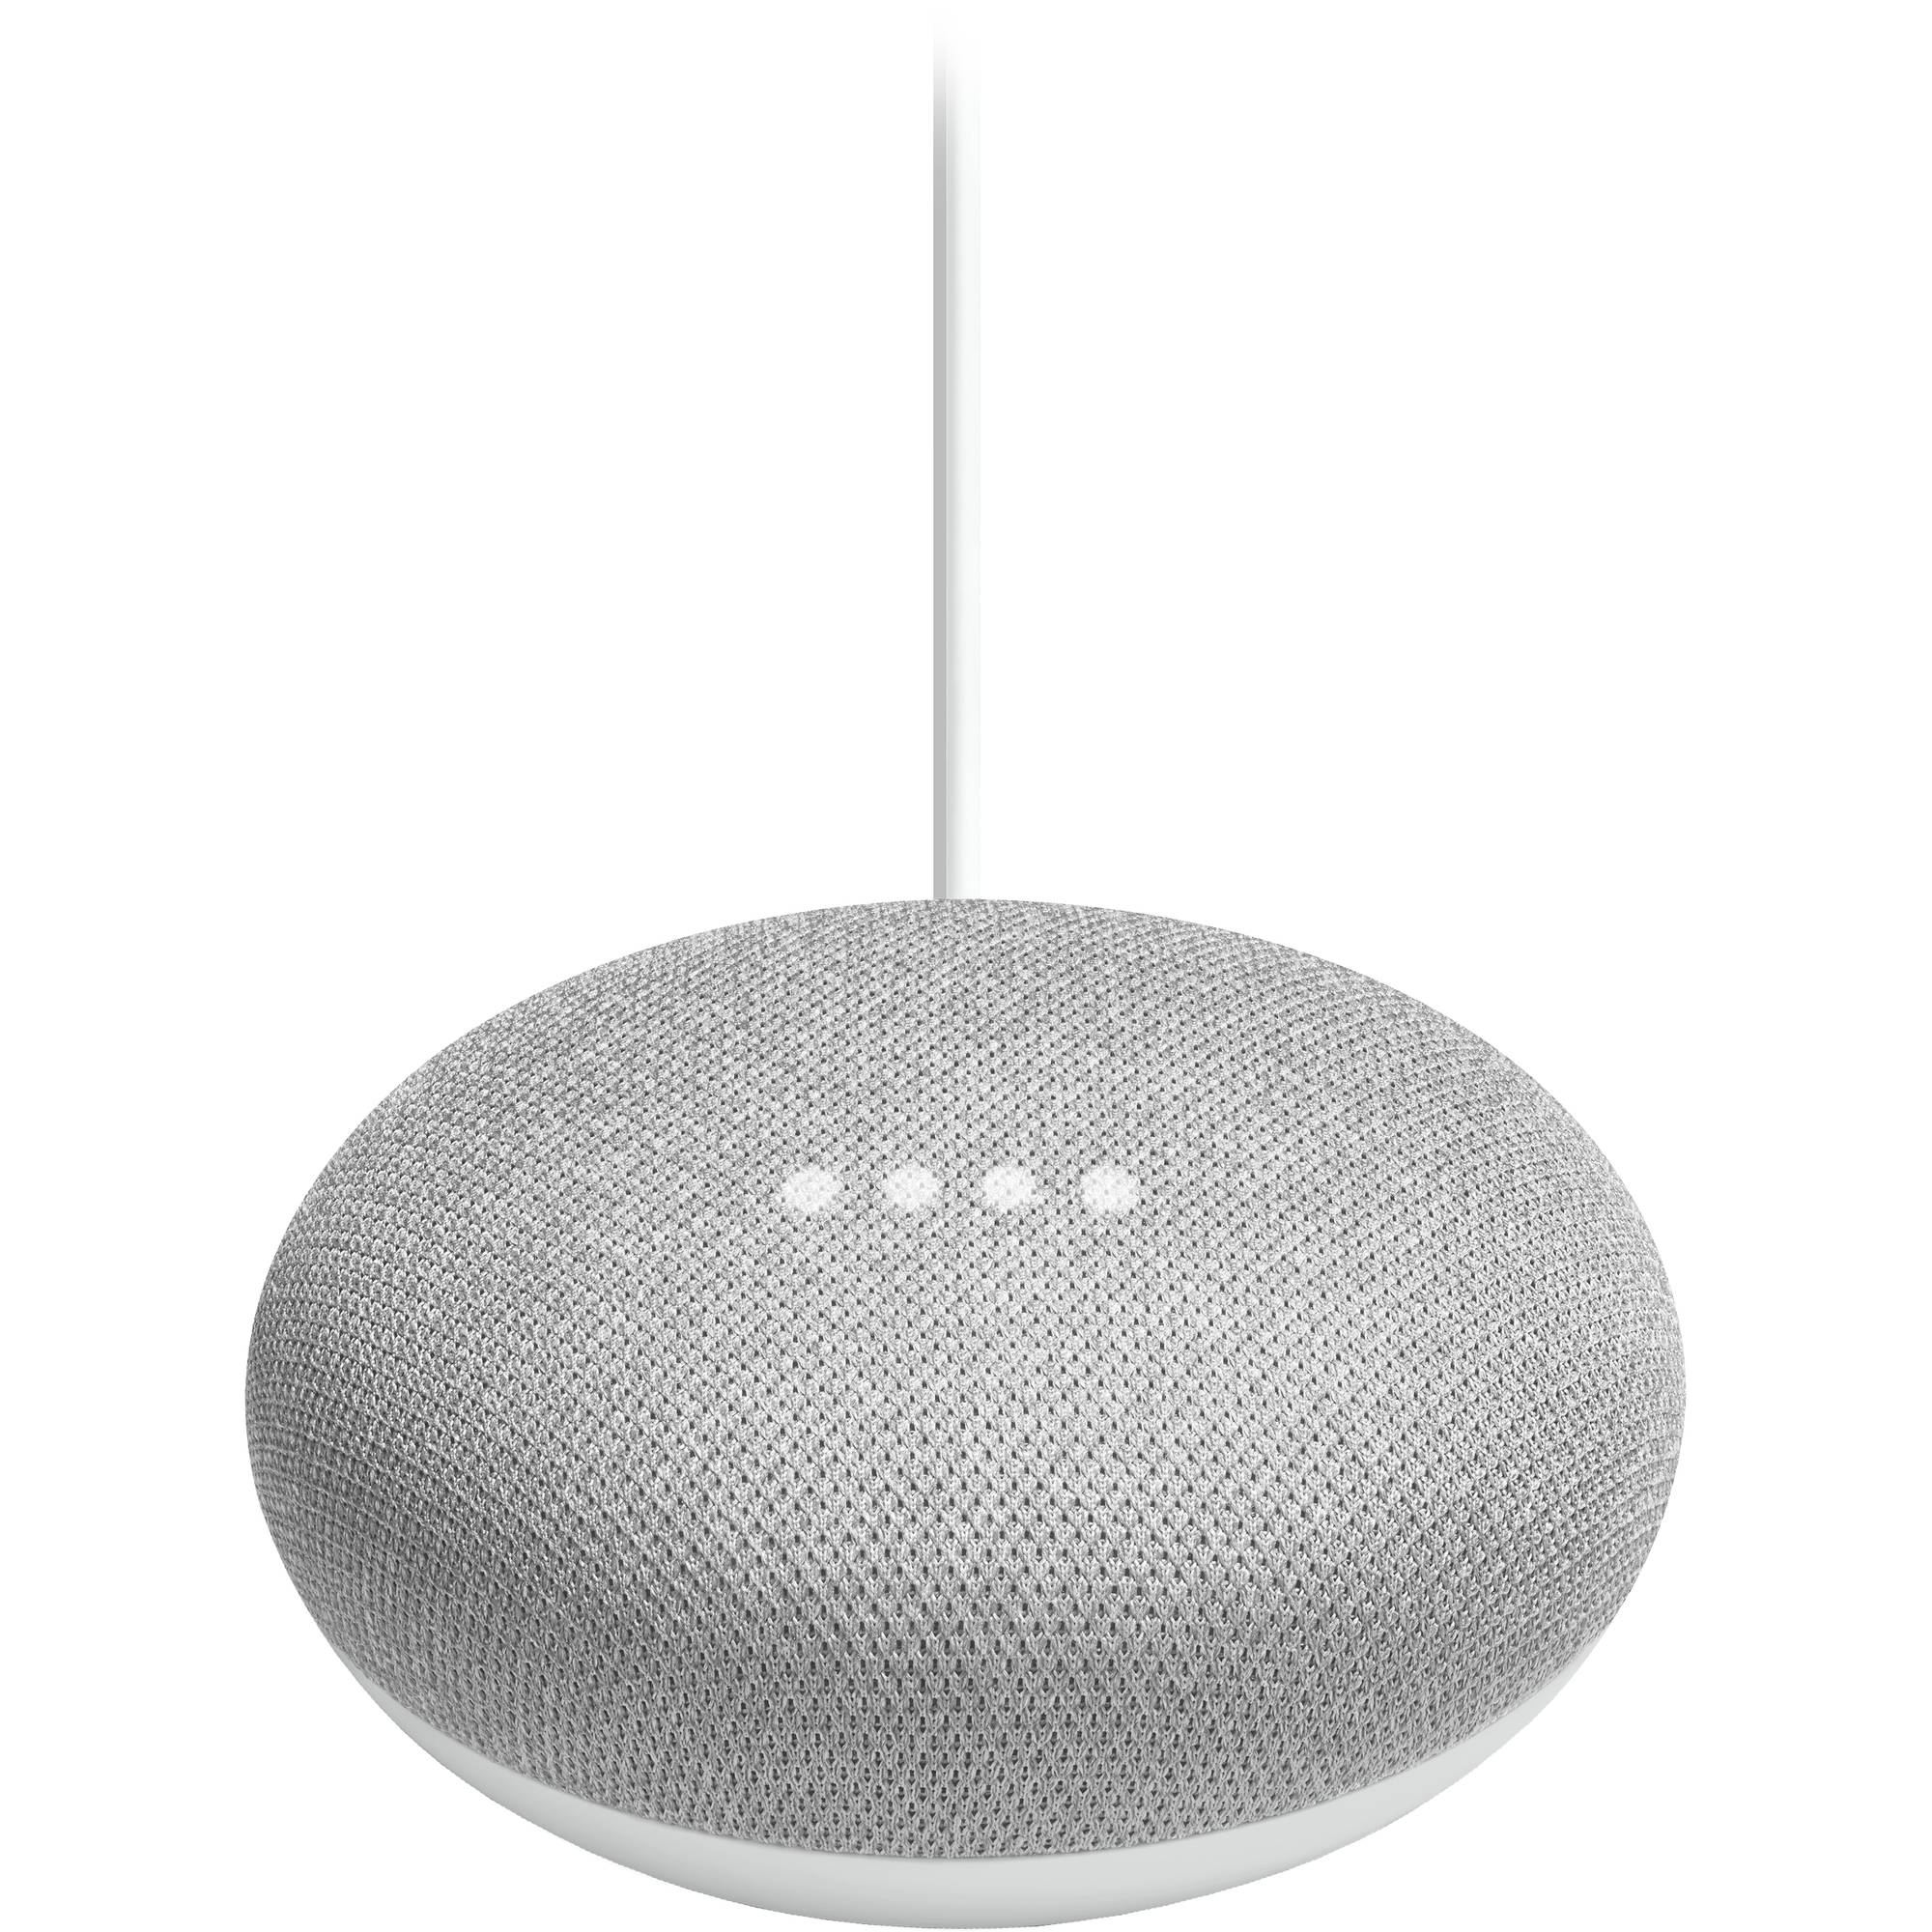 Google Home Mini (Chalk) for Android, iOS